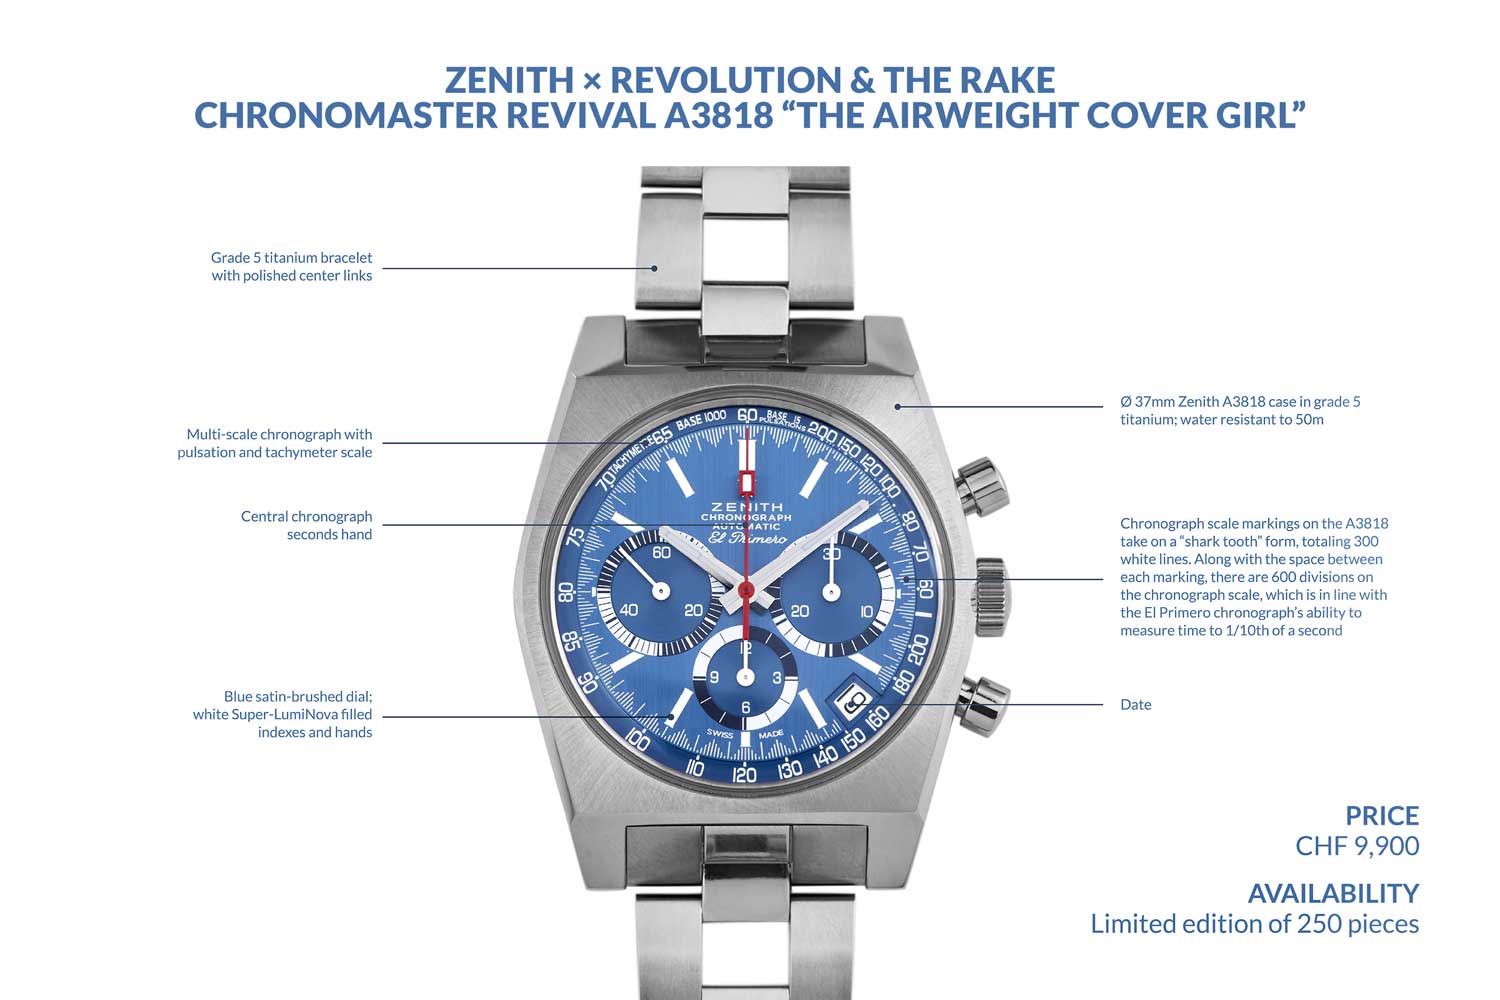 The Zenith × Revolution & The Rake Chronomaster Revival A3818 “The Airweight Cover Girl”